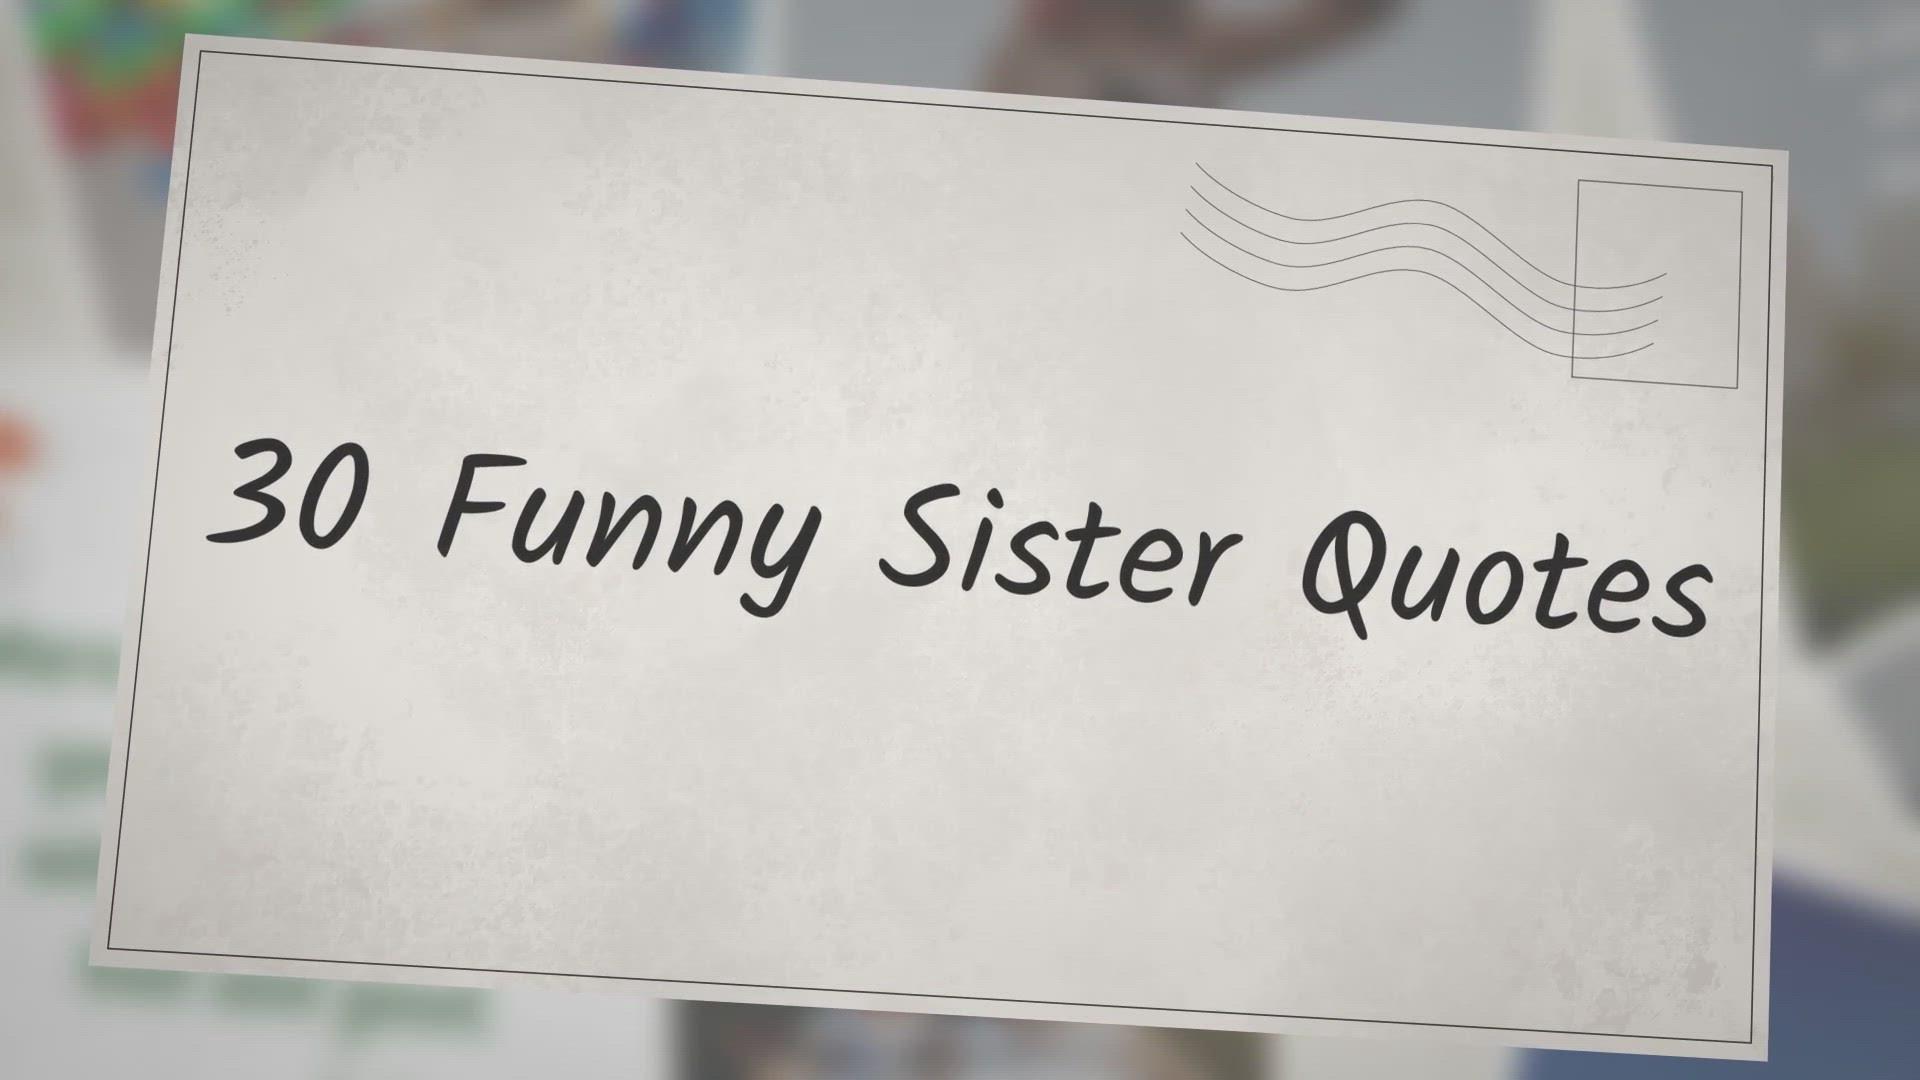 'Video thumbnail for 30 Funny Sister Quotes'